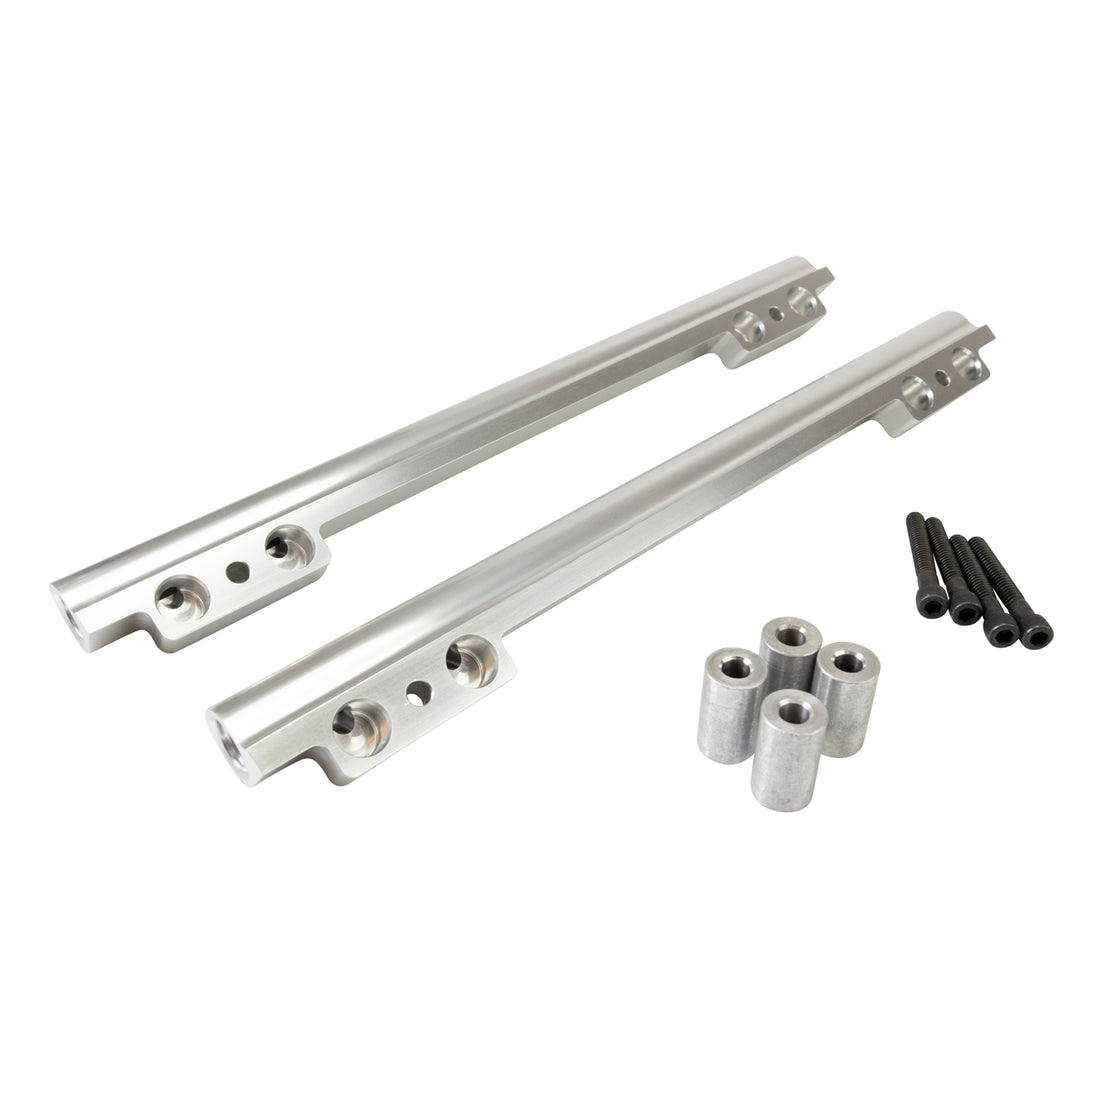 Fuel Injection Fuel Rail #3210, For AMC 290-401 (Use W/ Part #28105 And #28115) Edelbrock